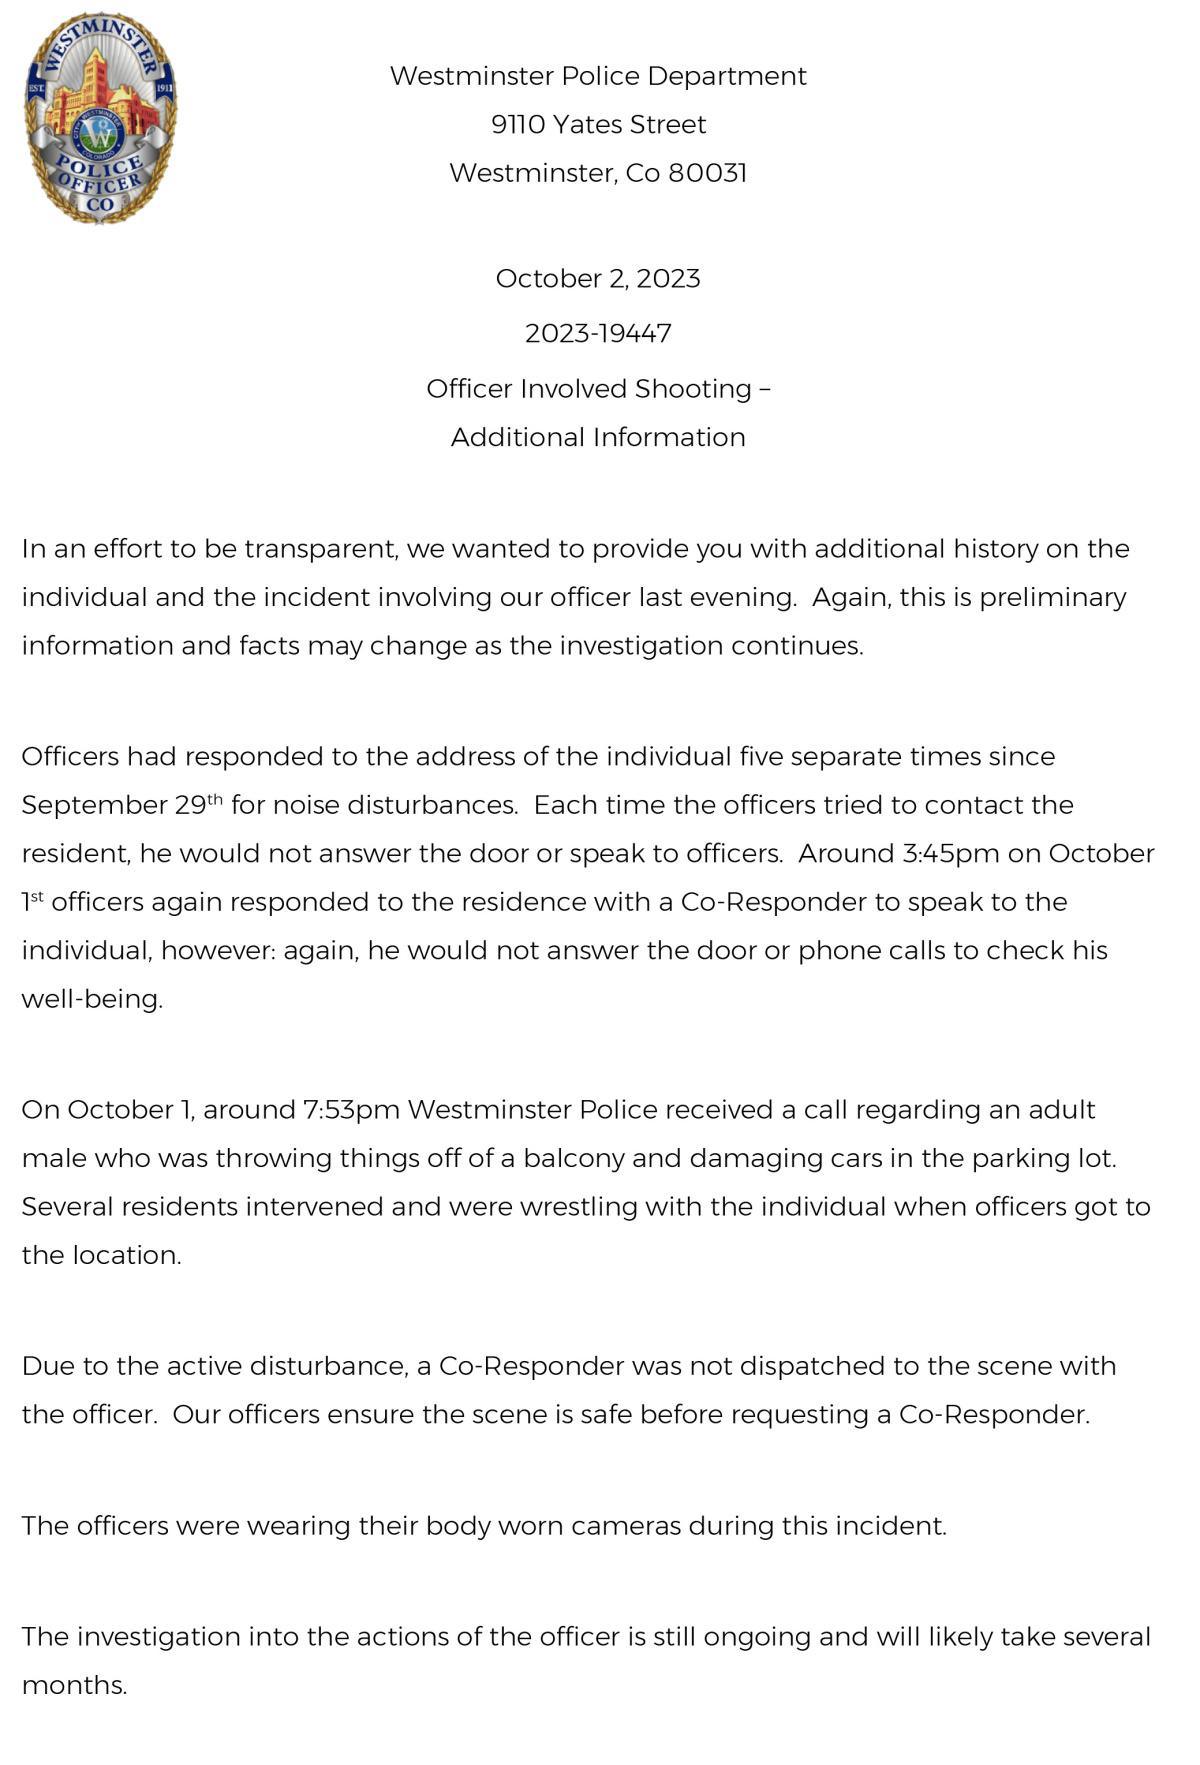 Updated Information - Officer Involved Shooting